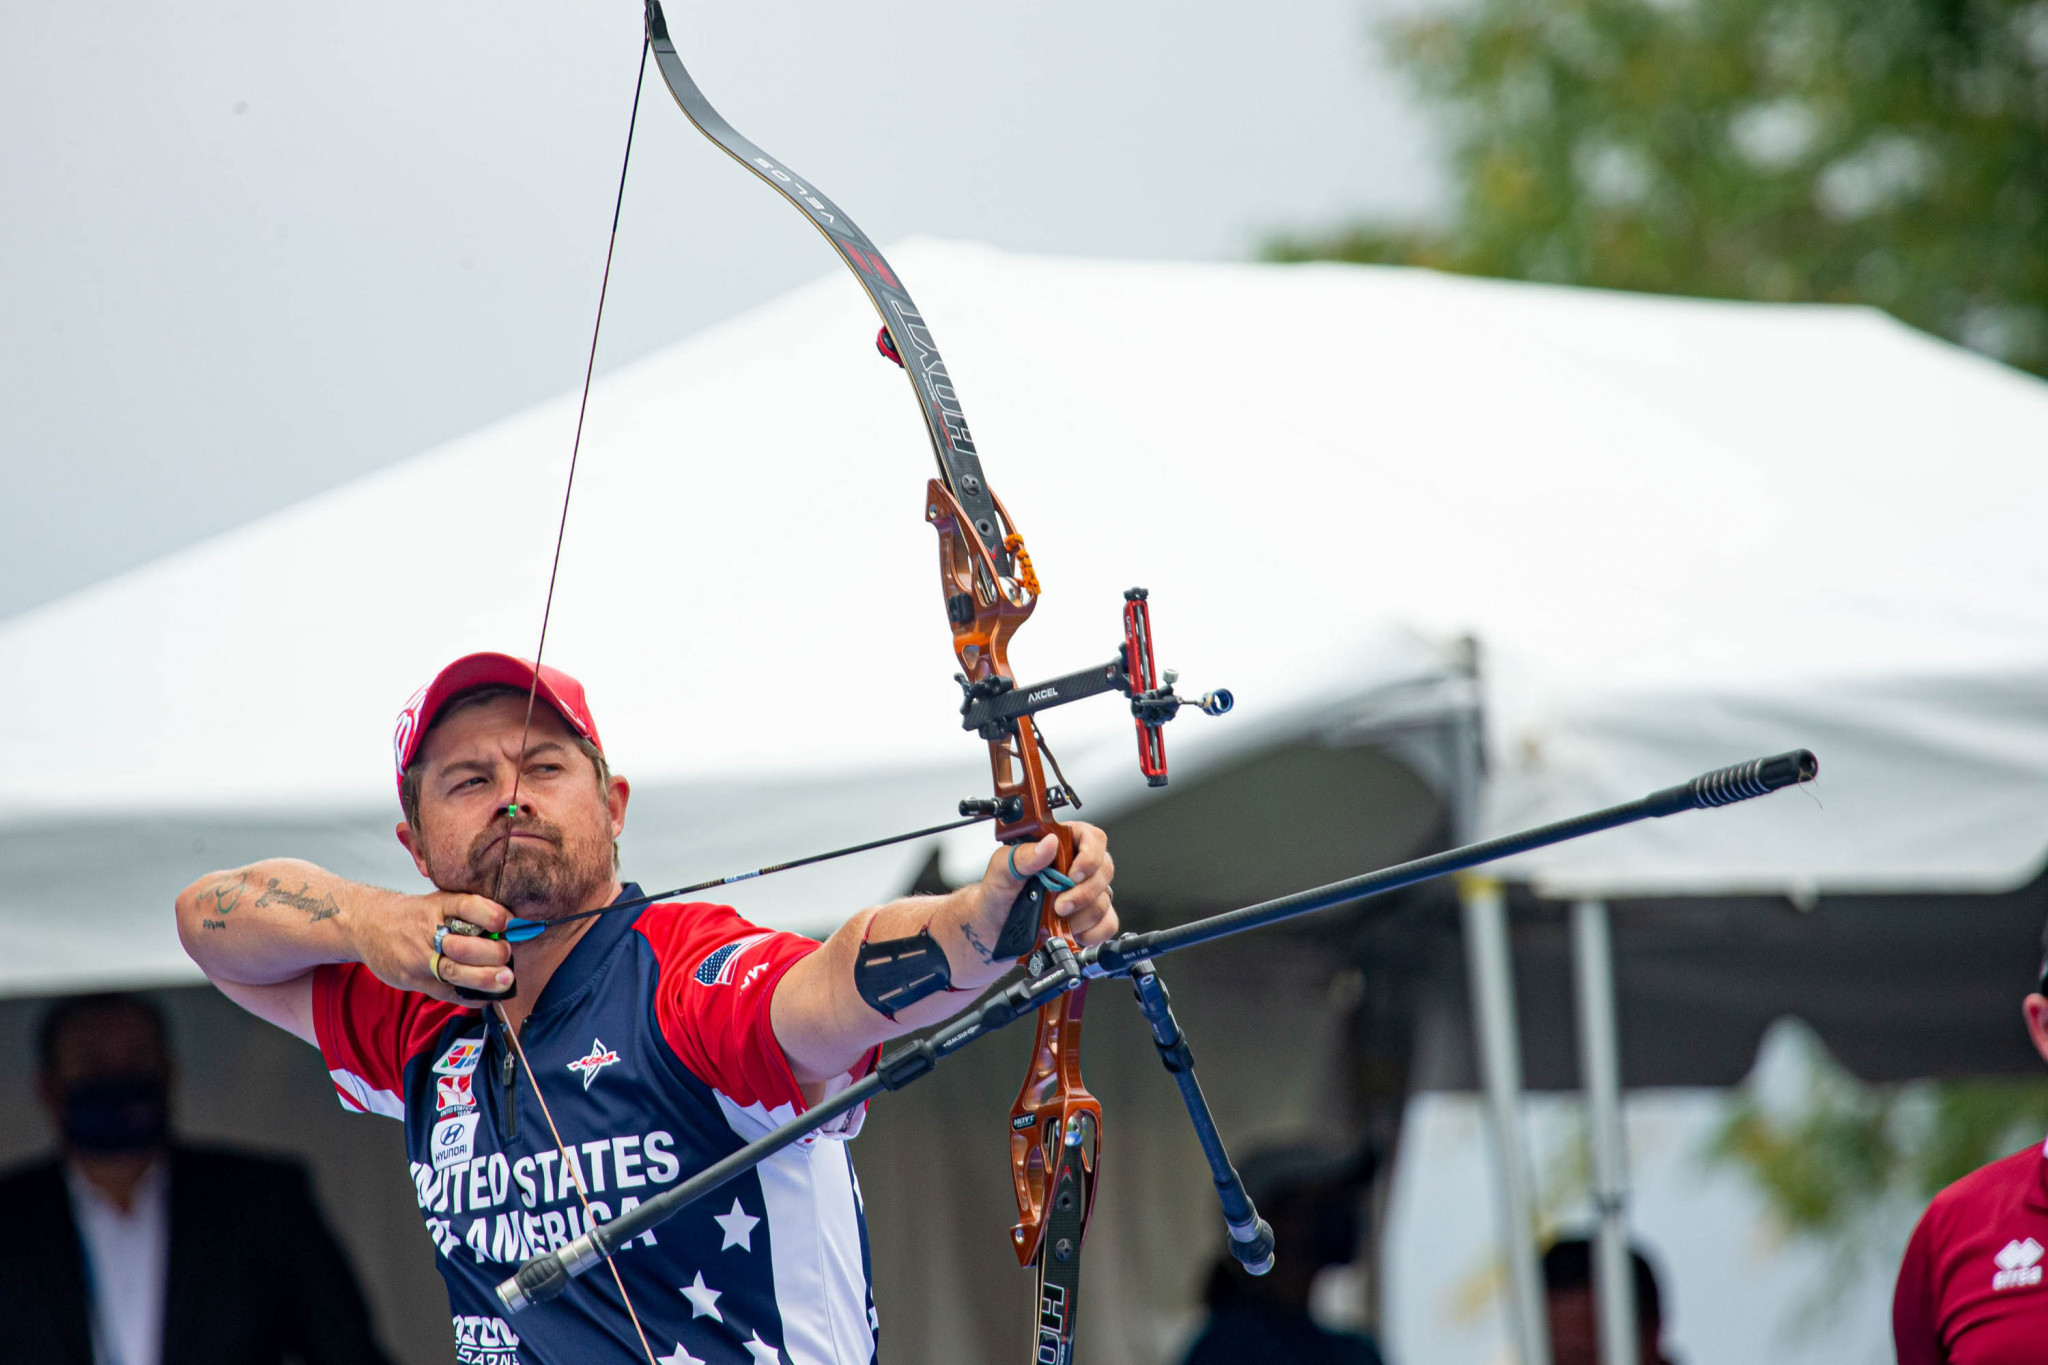 Brady Ellison reached the recurve mixed team final with Gabrielle Sasai in Paris ©Getty Images